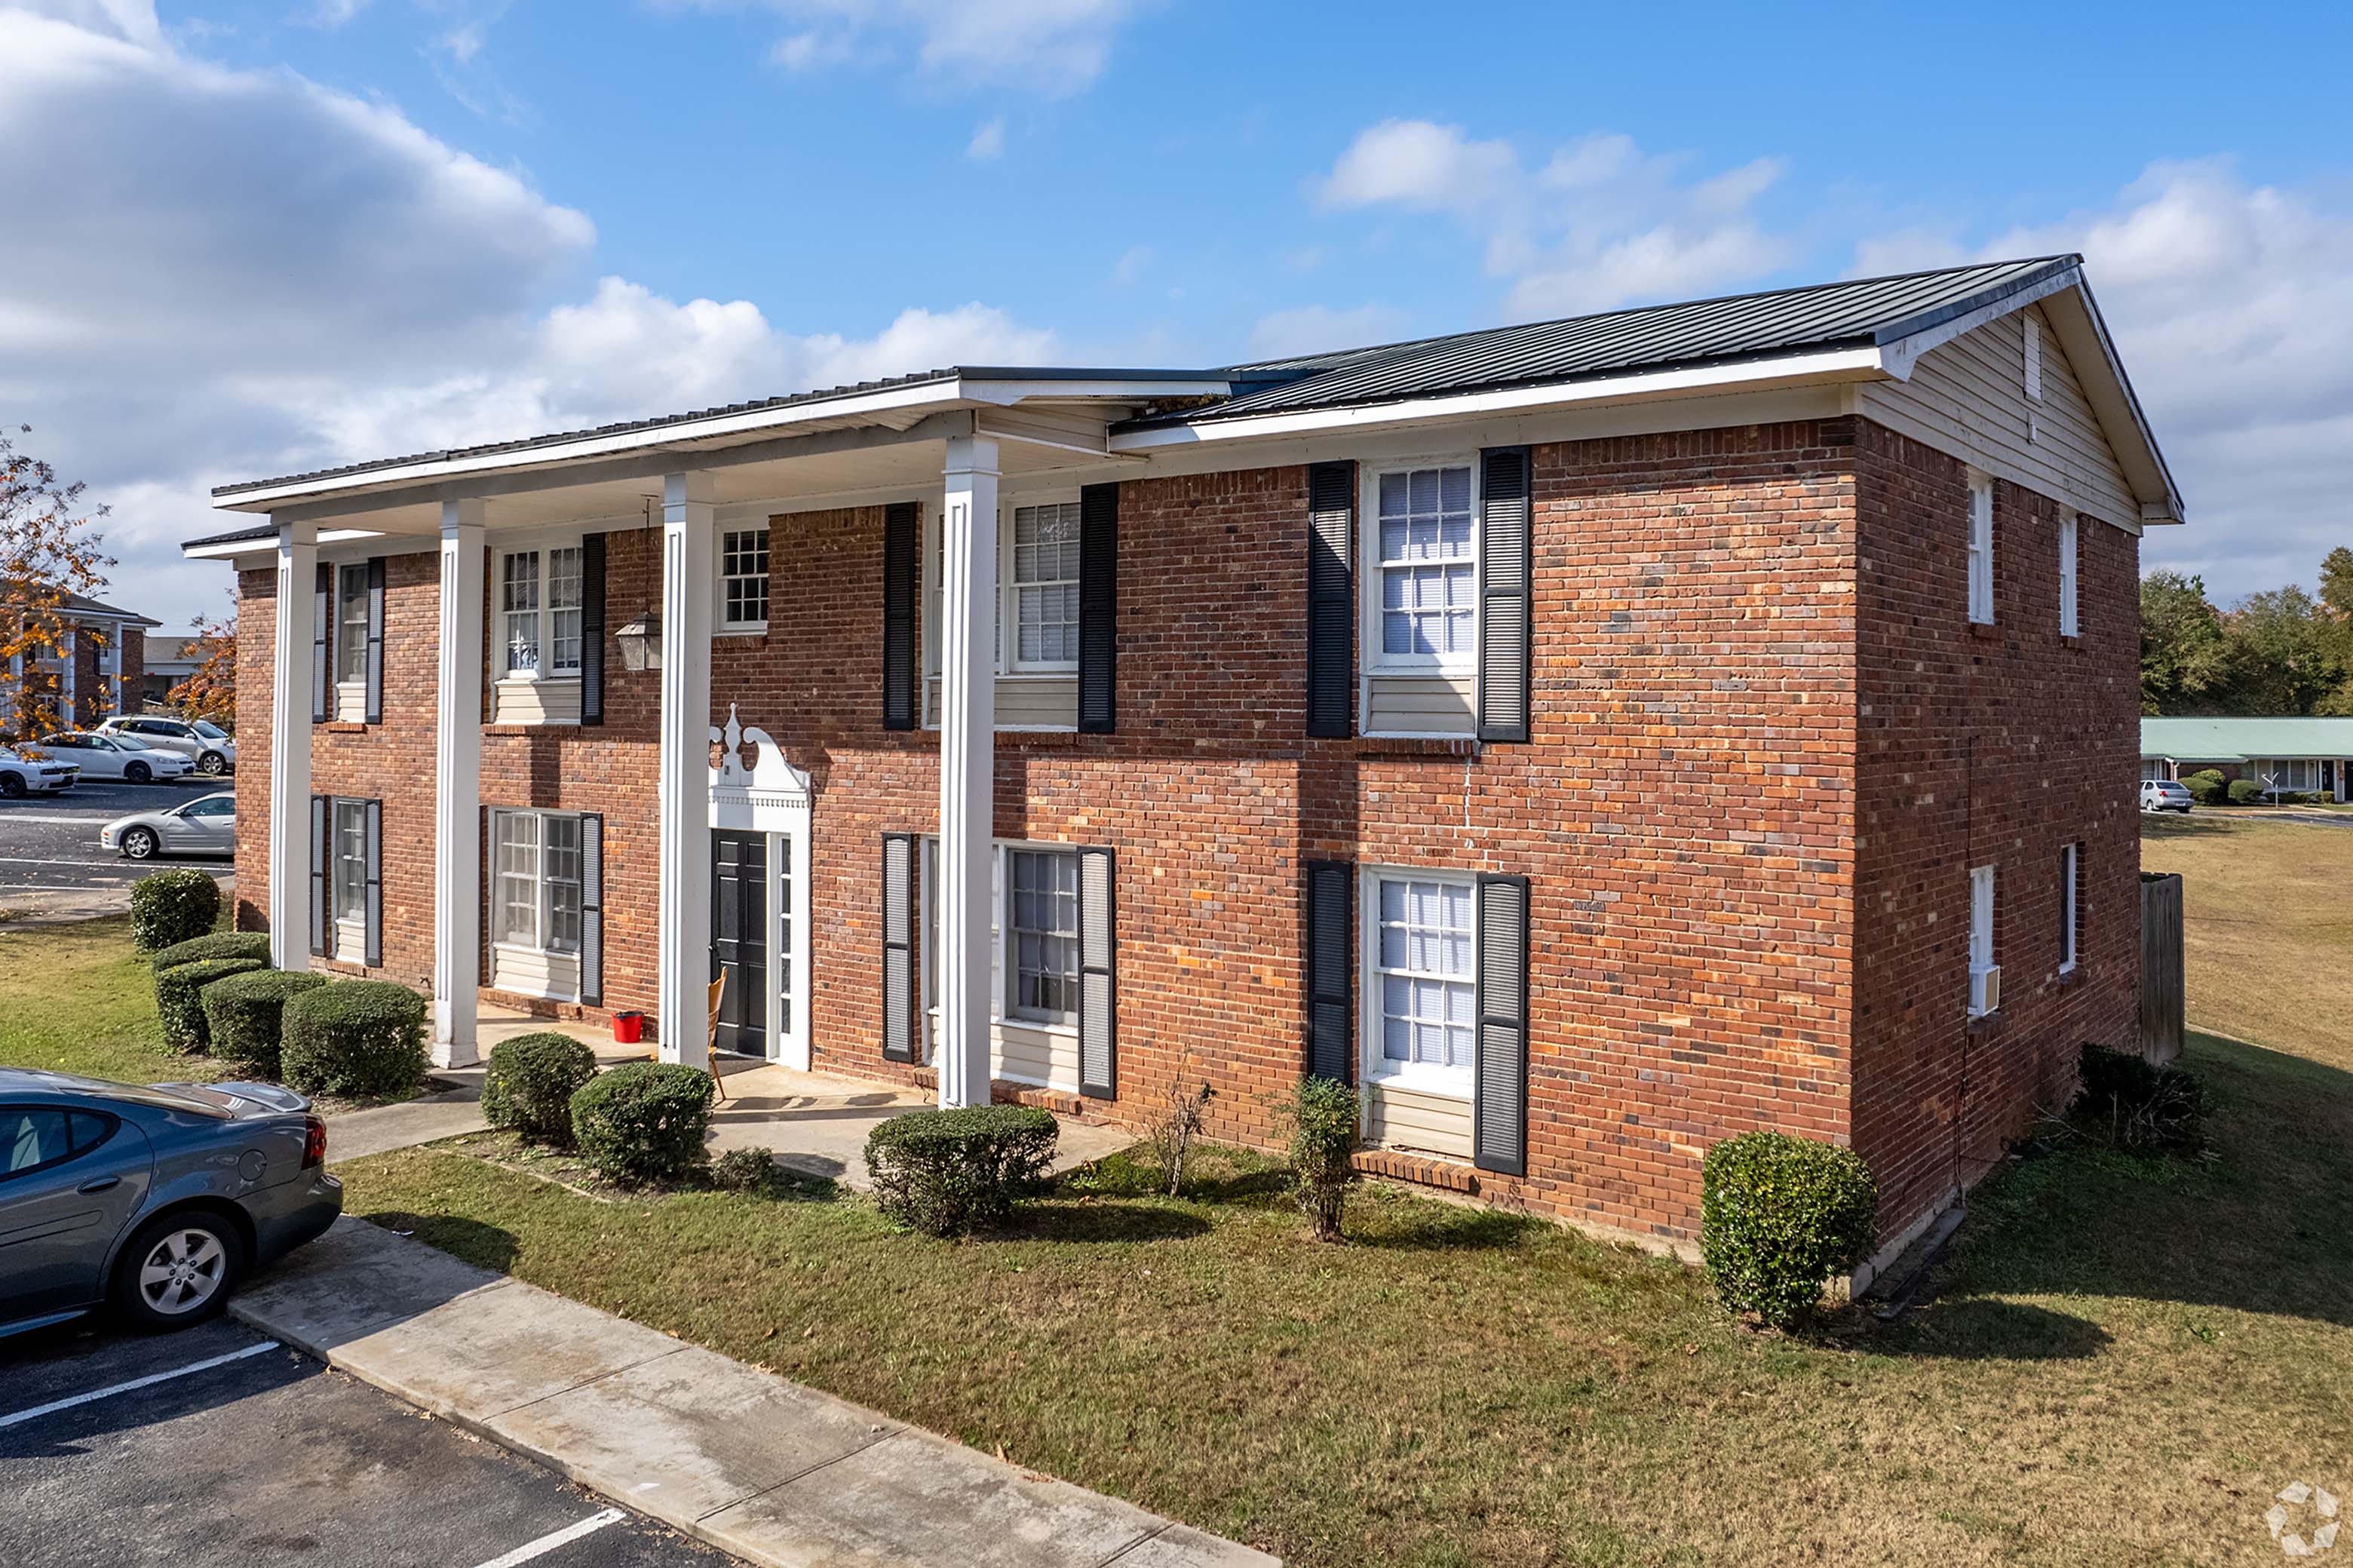 Ashley Oaks Apartments located in Perry, GA